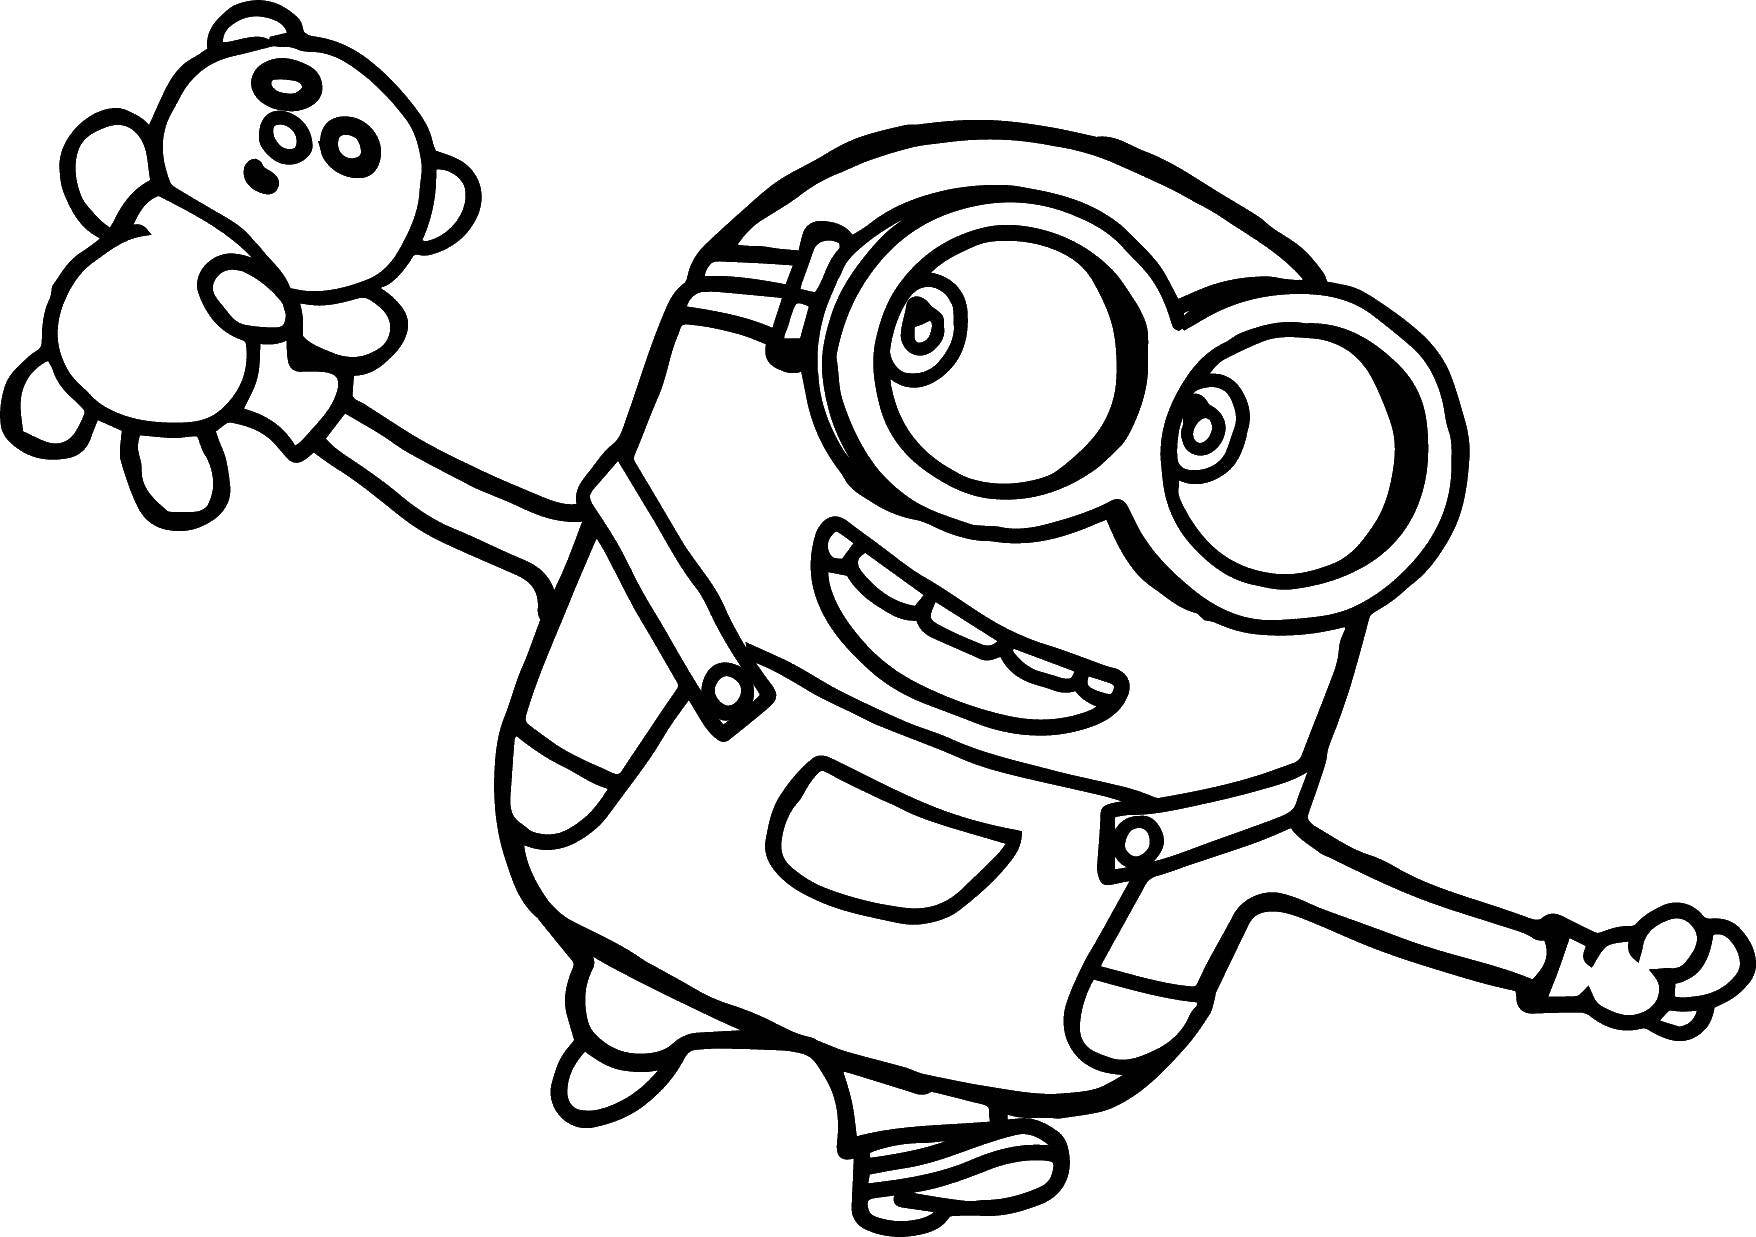 Coloring Minion. Category coloring. Tags:  Cartoon character, Minion.